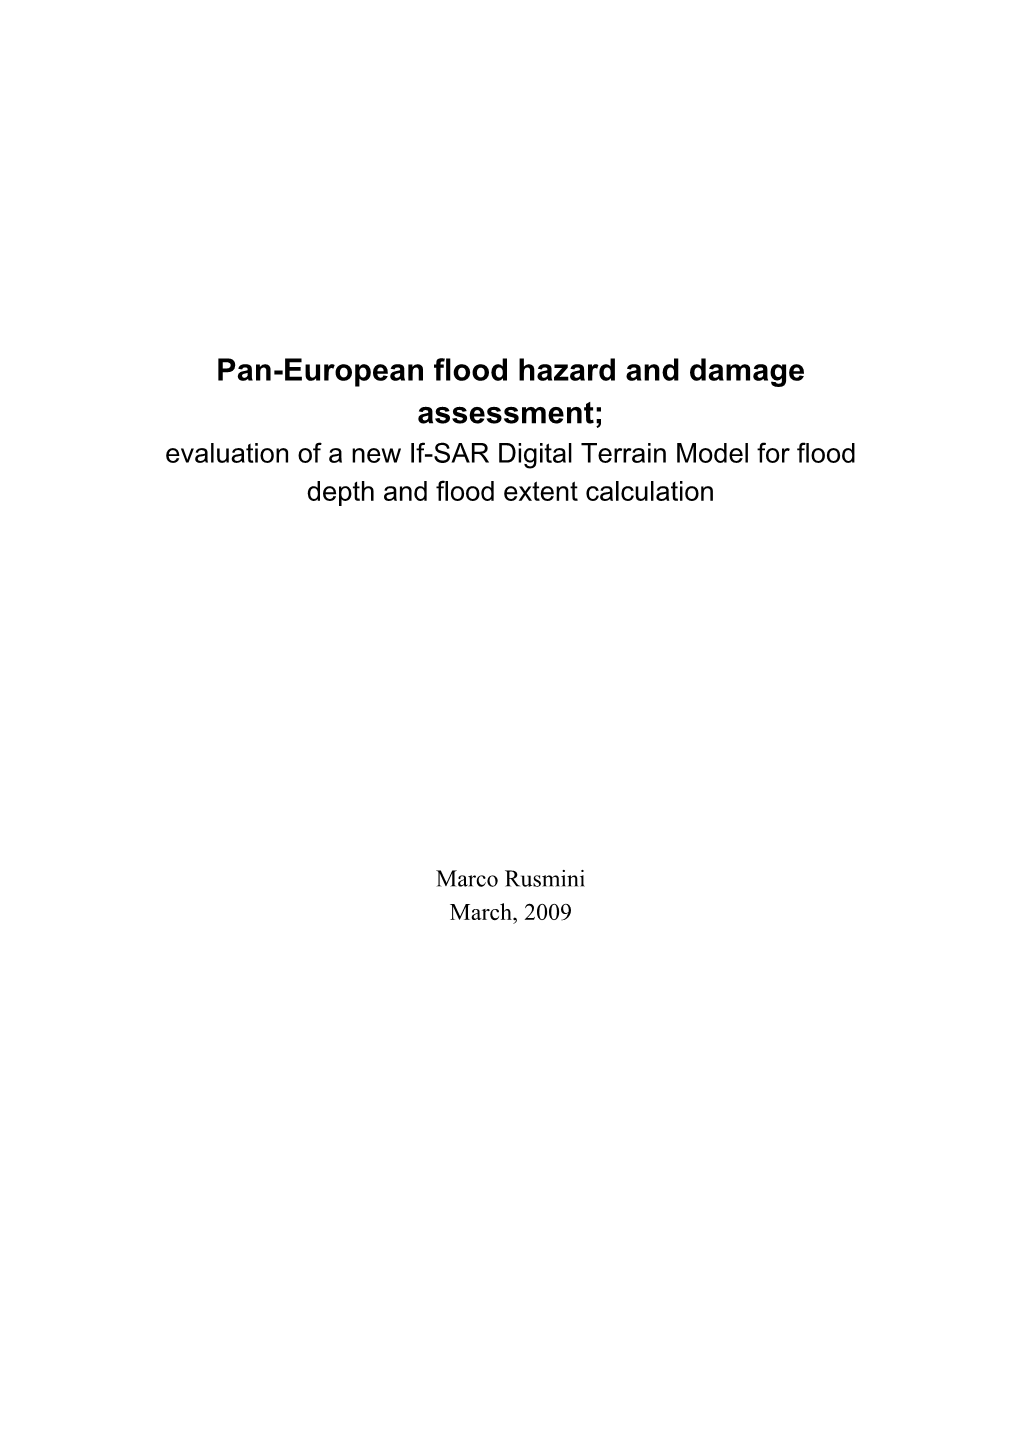 Pan-European Flood Hazard and Damage Assessment; Evaluation of a New If-SAR Digital Terrain Model for Flood Depth and Flood Extent Calculation